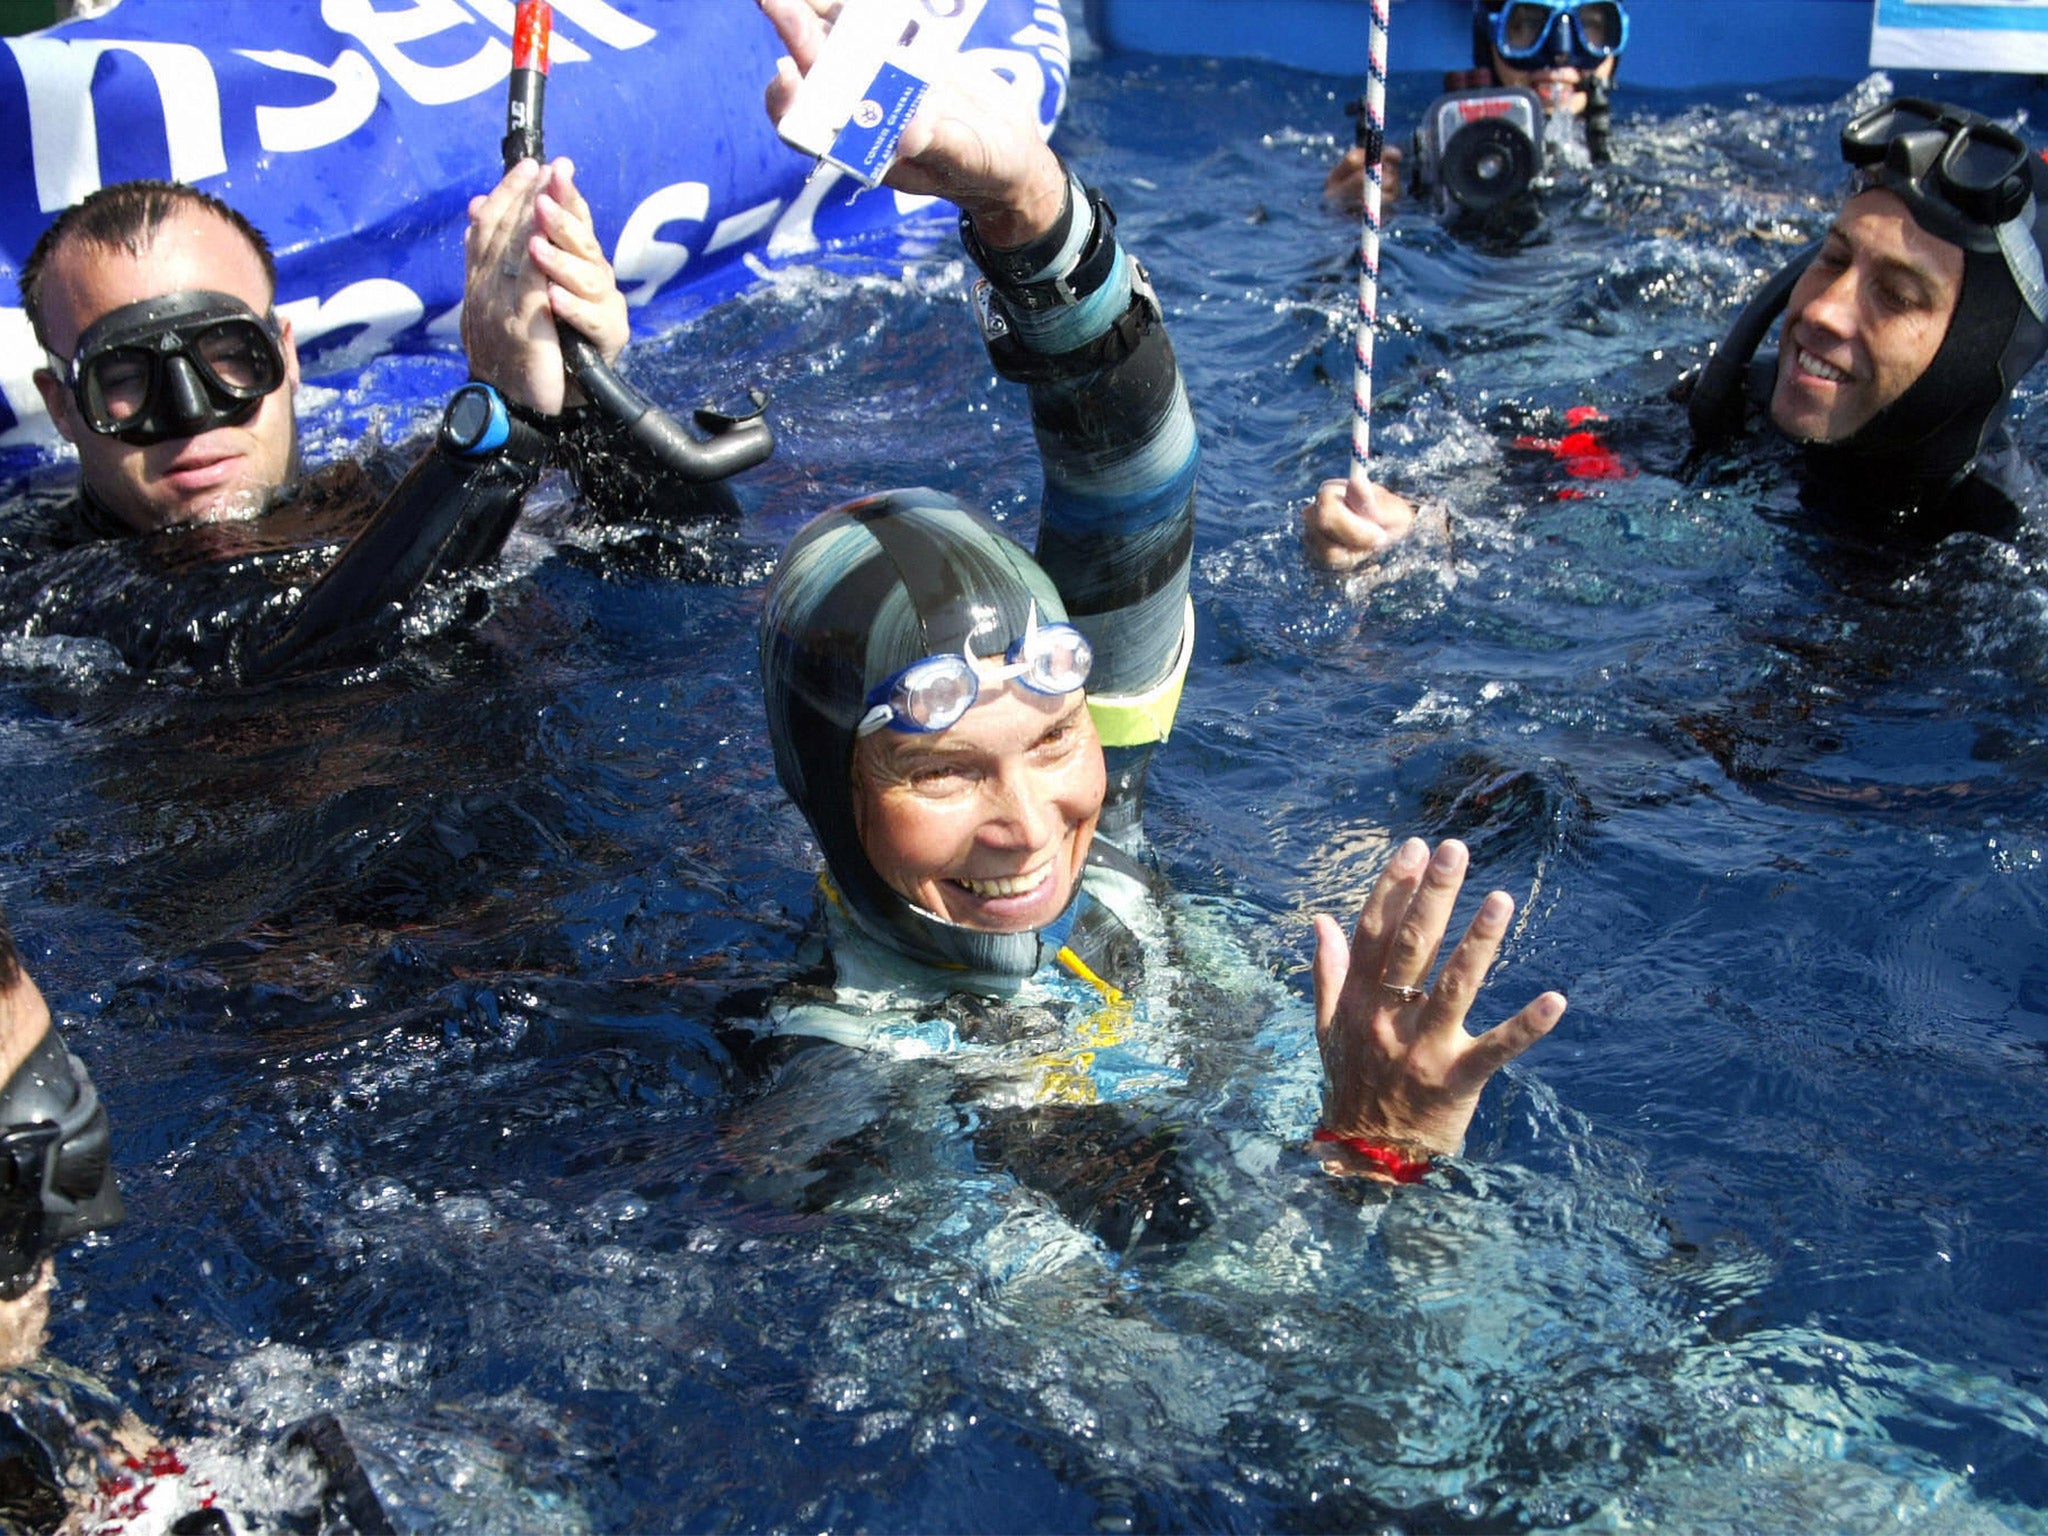 Natalia Molchanova winning a women’s free-diving world championship in 2005; she was a 23-time world champion and able to reach depths of 100 metres